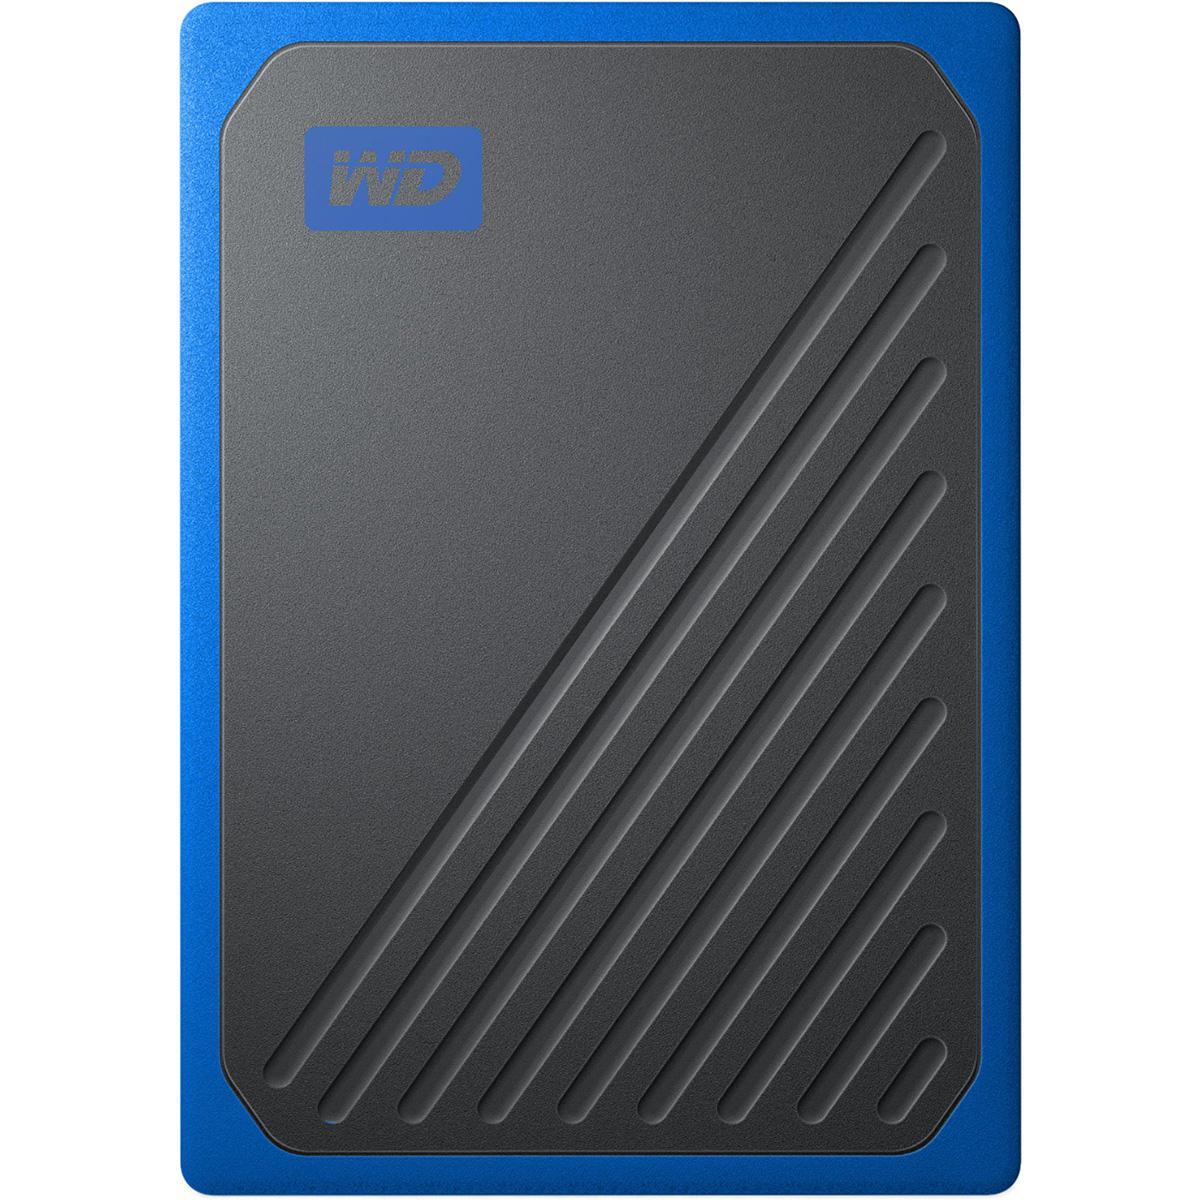 WD My Passport Go 1TB External SSD Solid State Drive for $99.99 Shipped